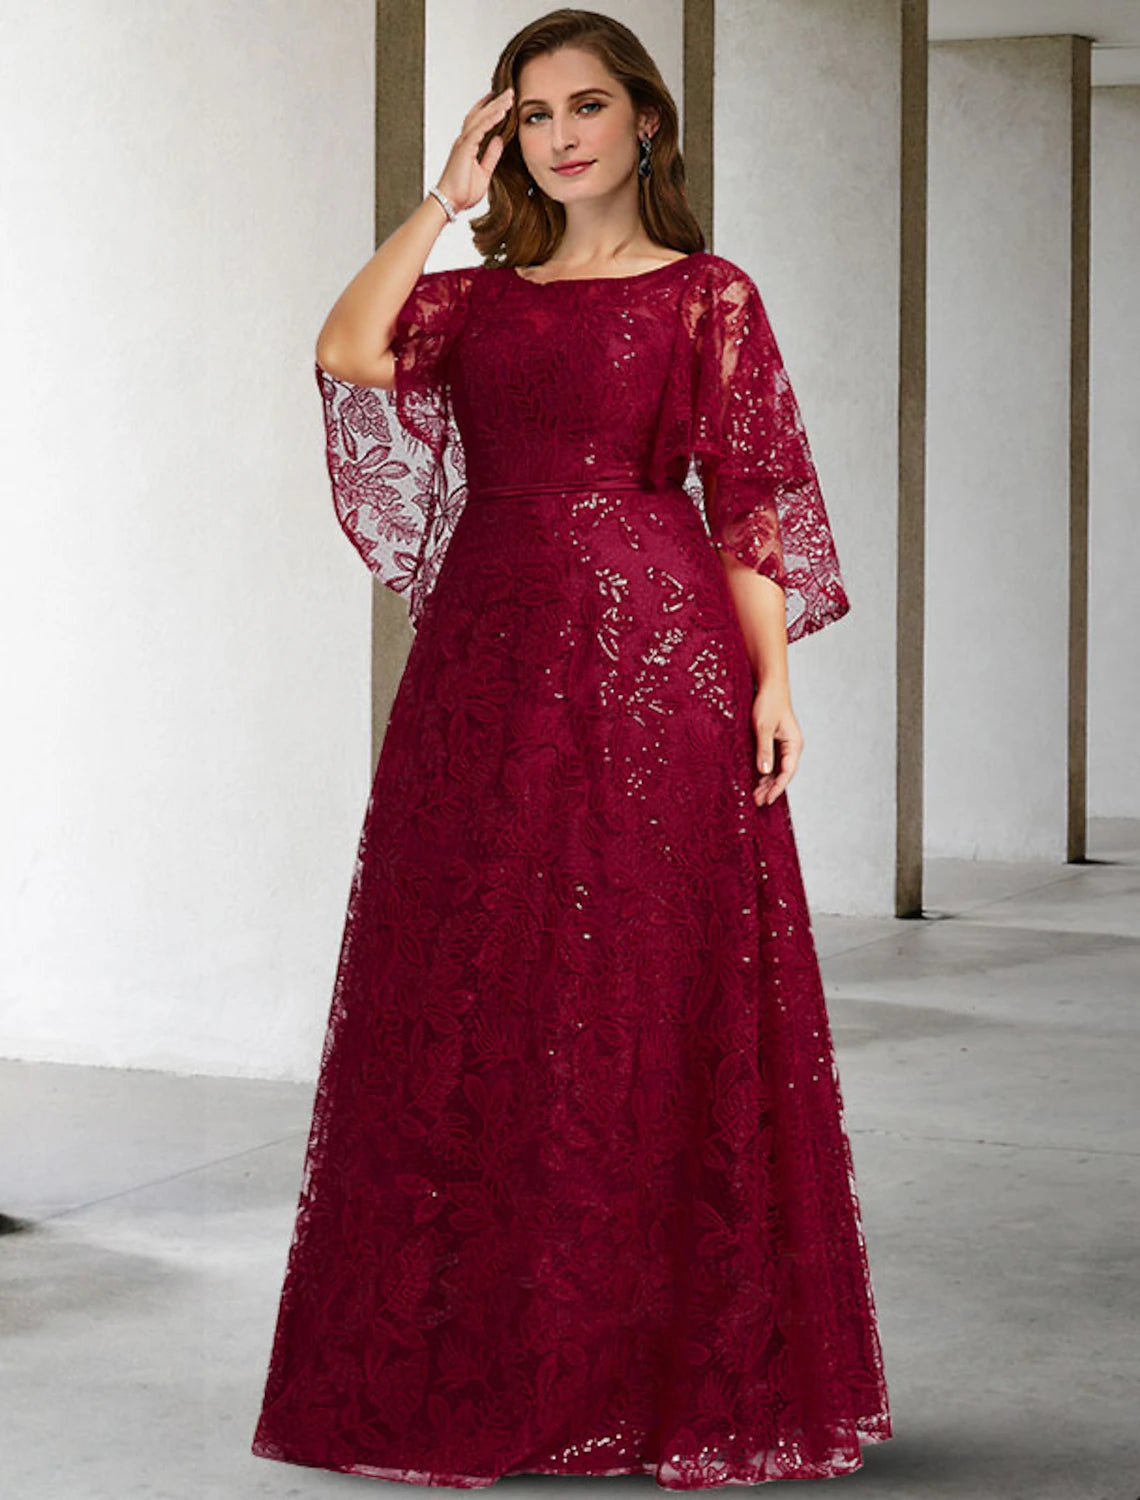 A-Line Mother of the Bride Dress Plus Size Hide Belly Elegant Jewel Neck Floor Length Lace Half Sleeve No with Sequin Appliques